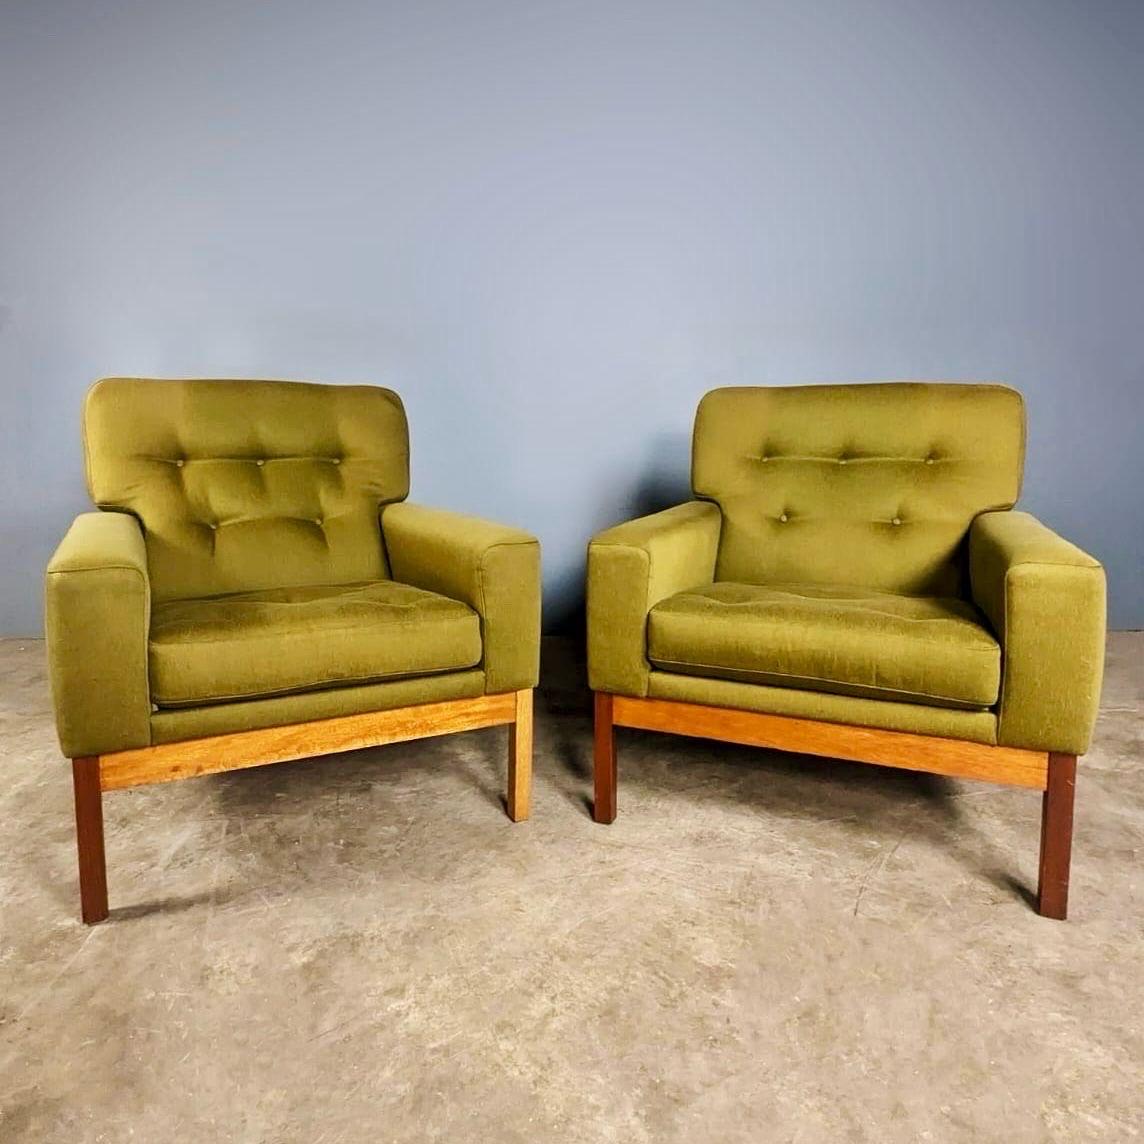 New Stock ✅

Mid Century Guy Rogers Three Seater Sofa and Matching Armchairs in Green Wool Silk Blend Fabric 

Guy Rogers of Liverpool were probably the largest and best known makers of contemporary upholstered furniture in the 1960s in the world at